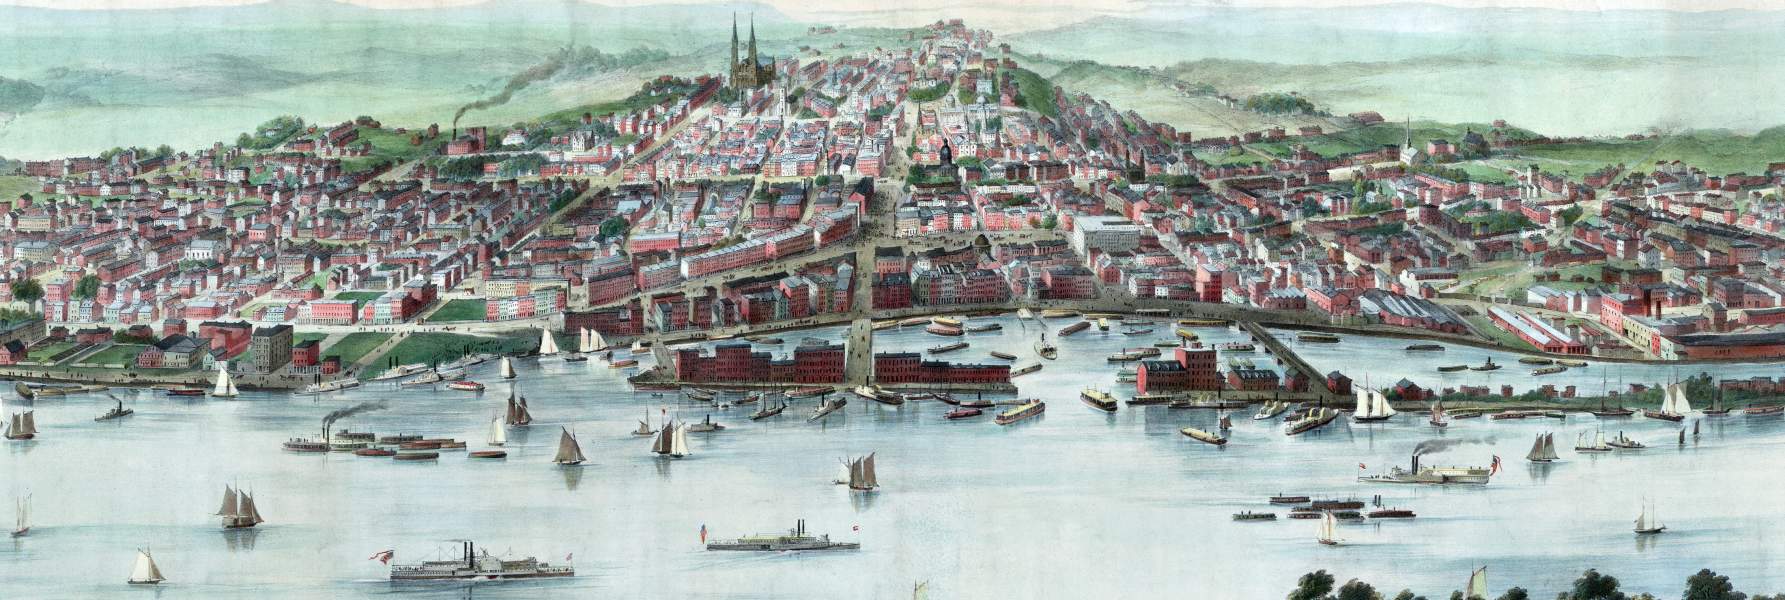 Albany, New York, 1853, detail, zoomable image